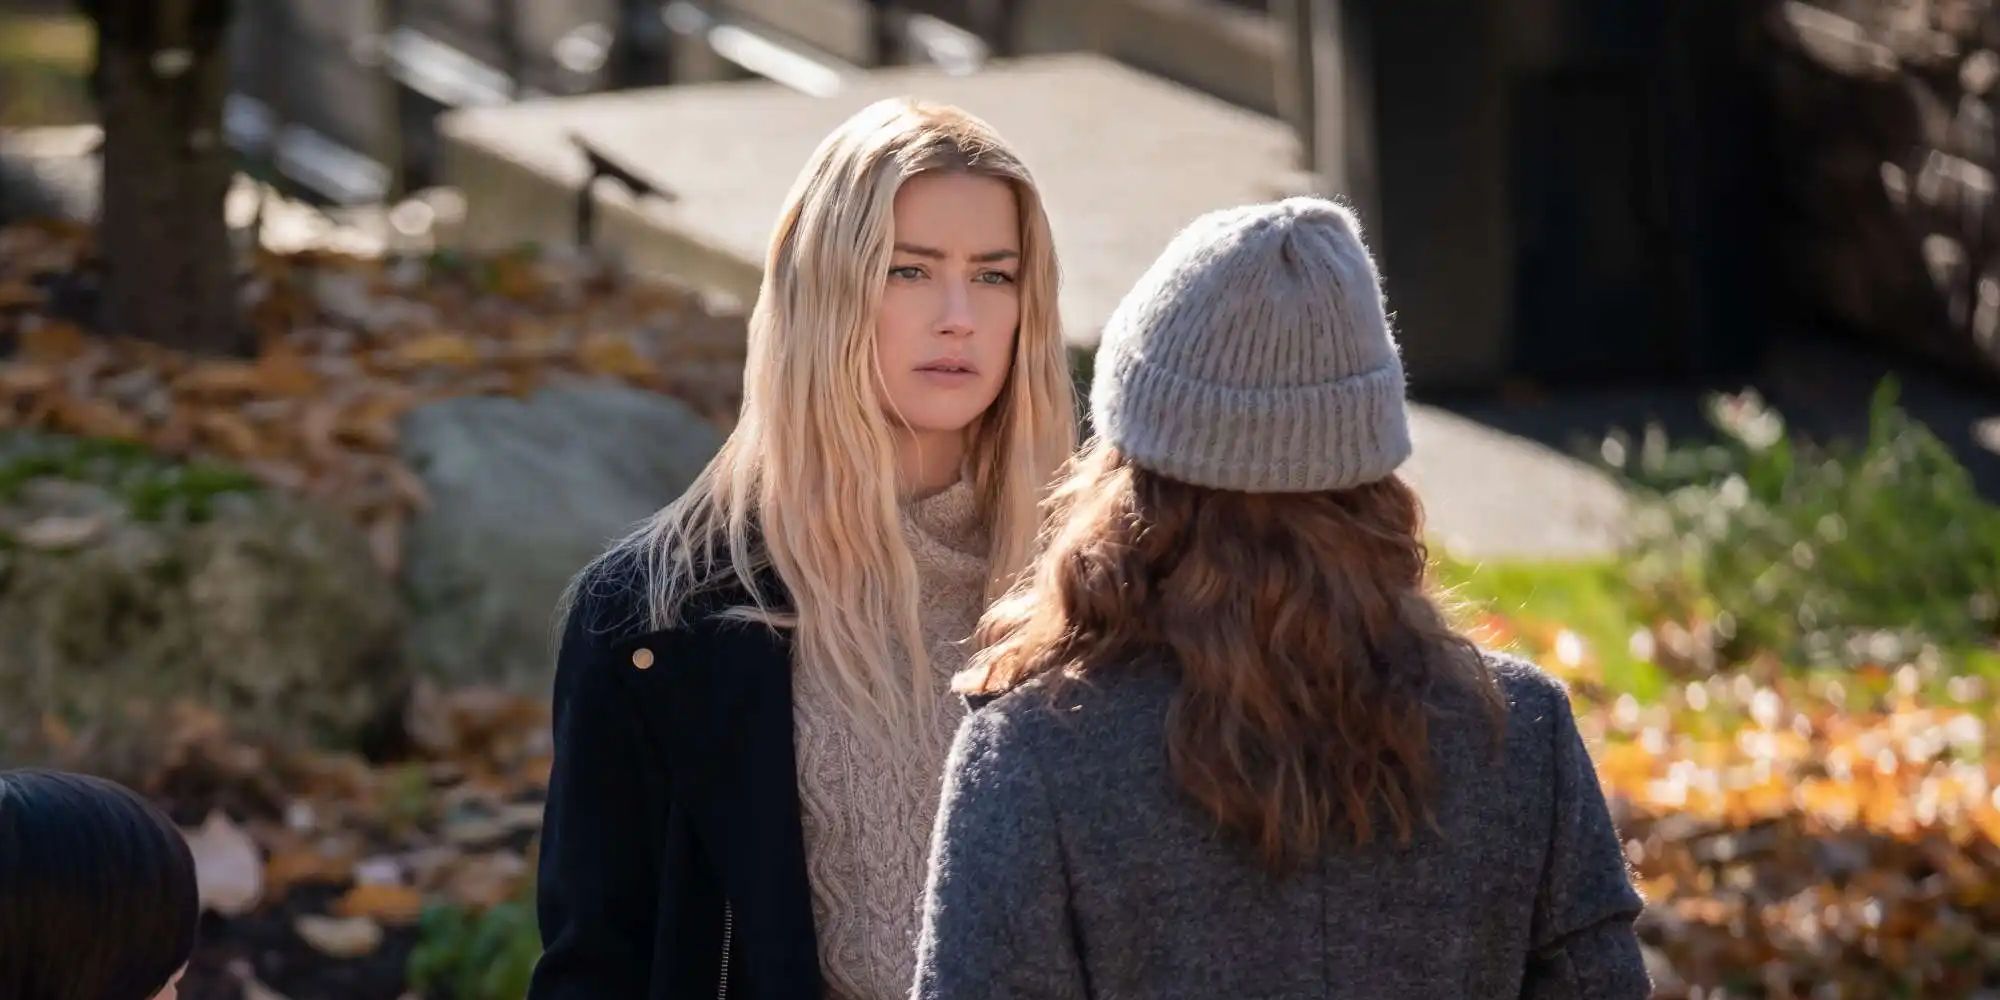 Nadine speaking with Frannie in CBS's The Stand.